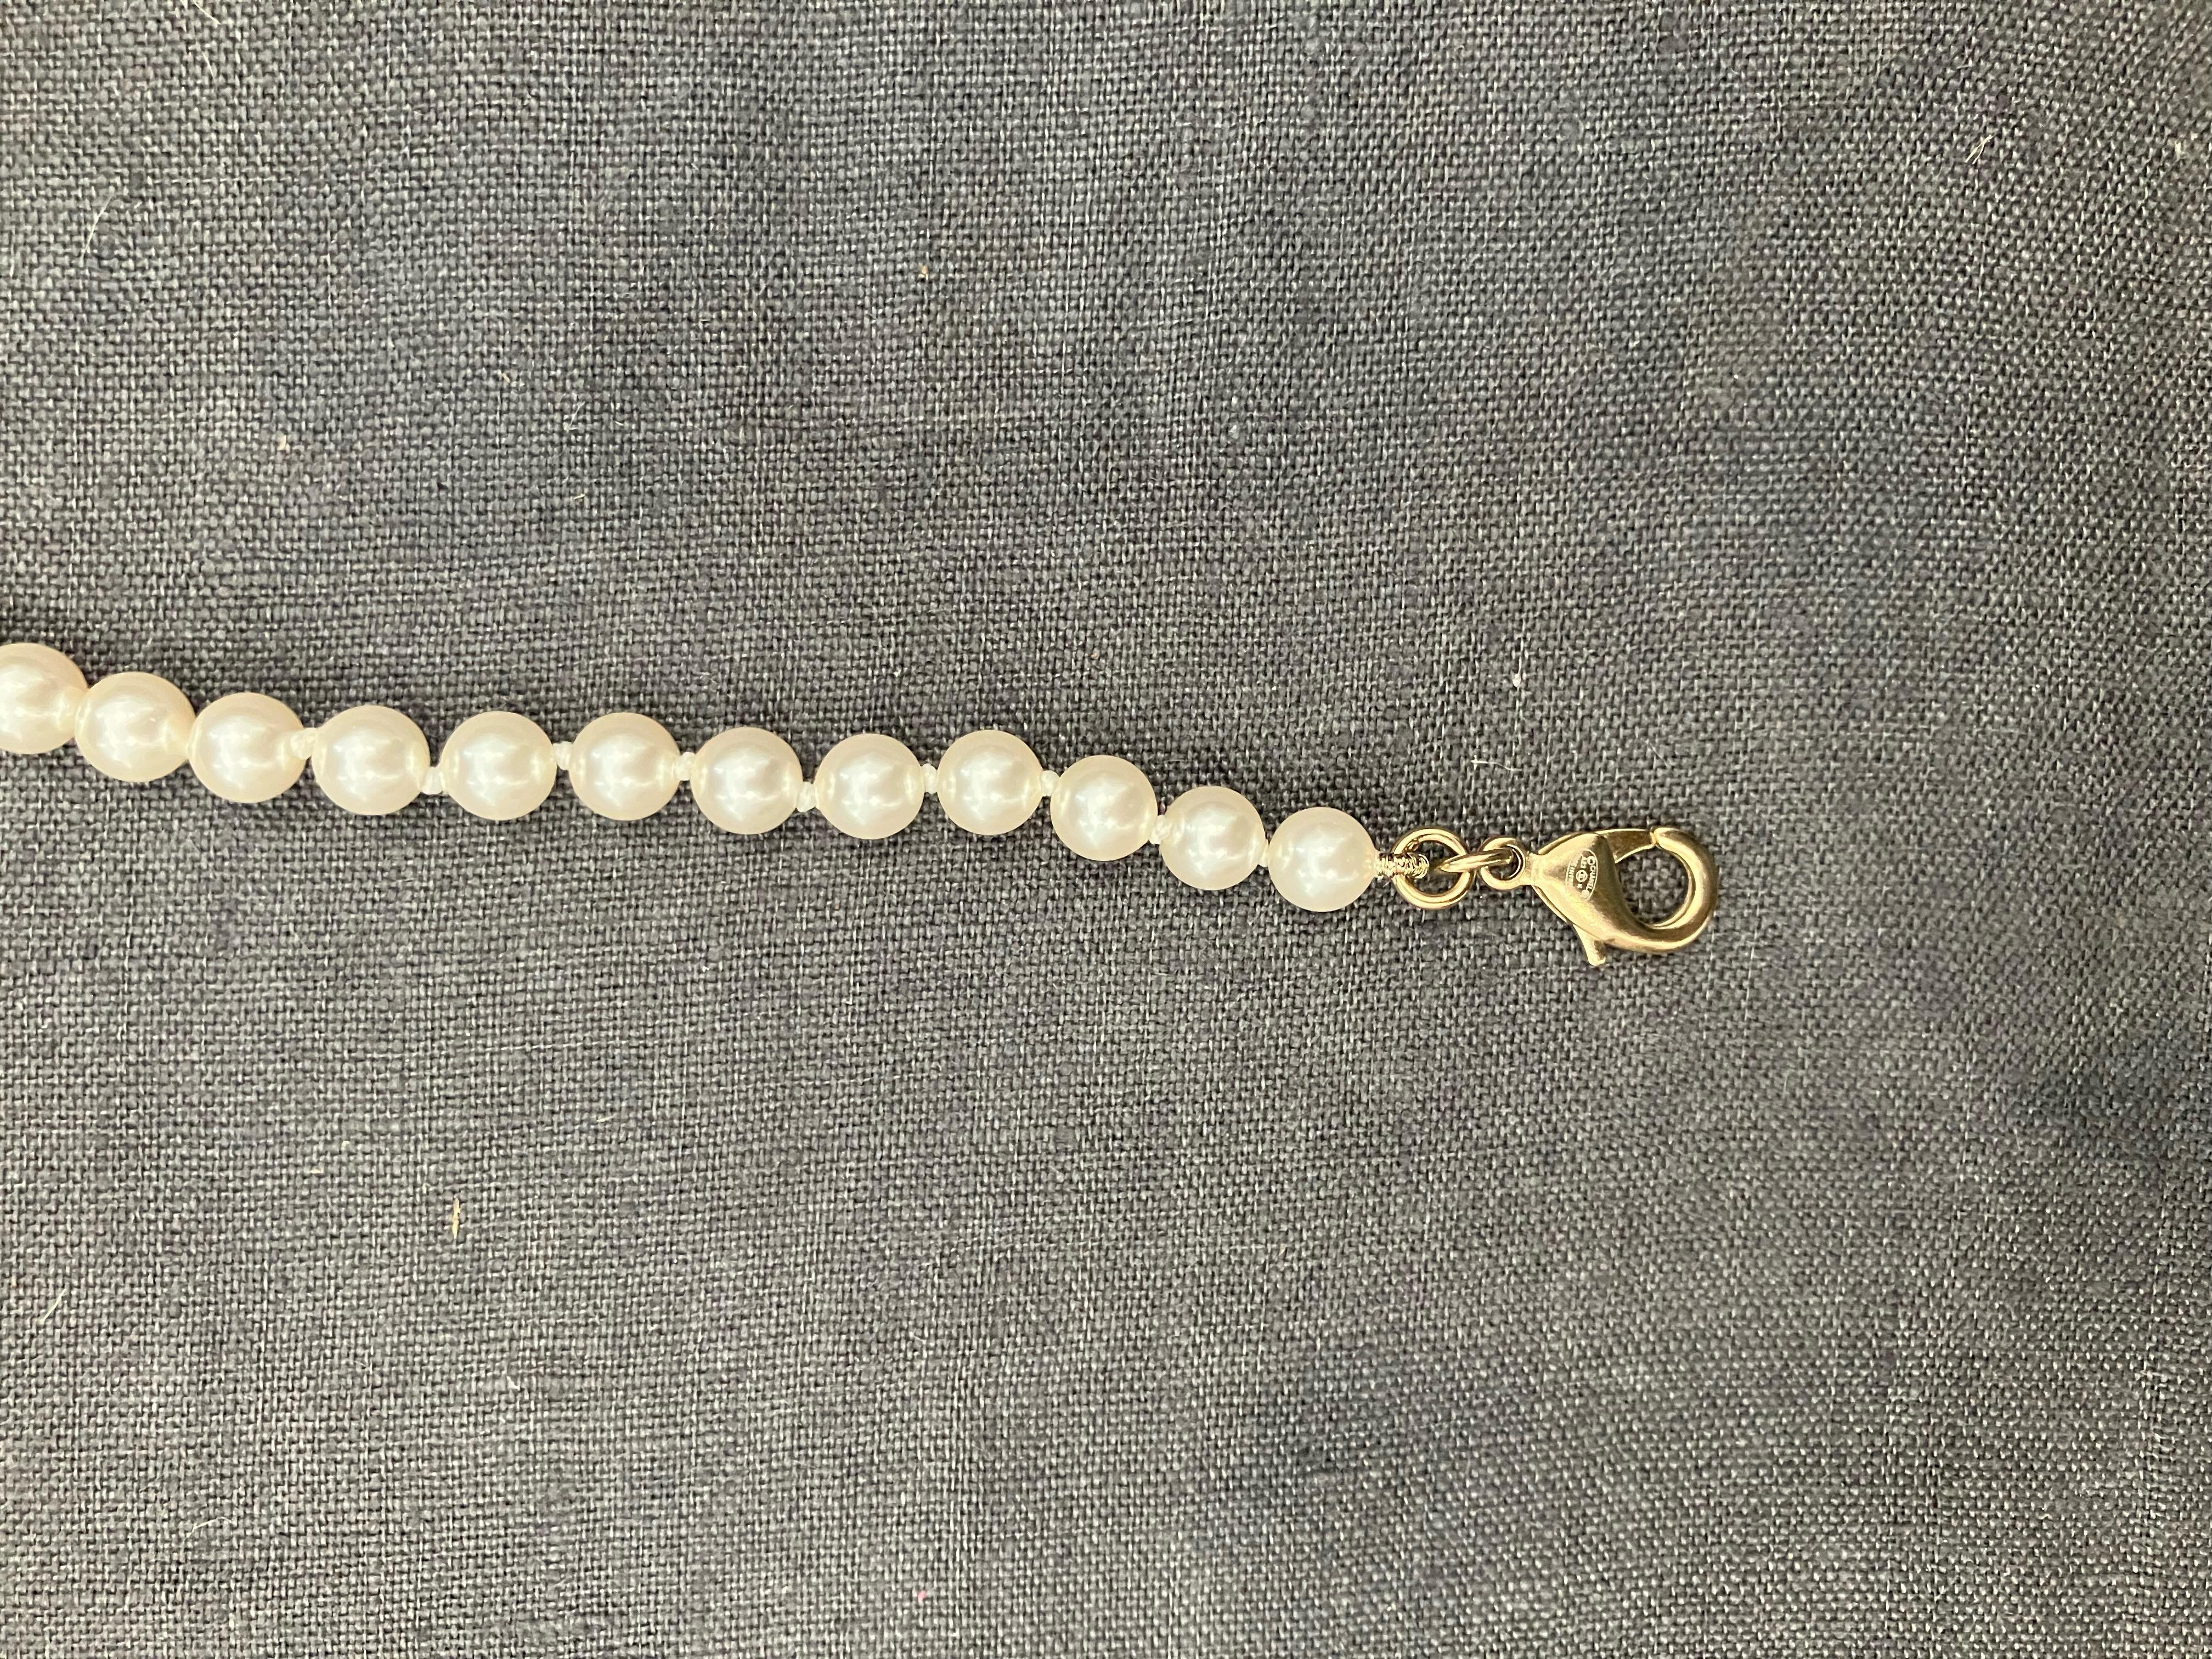 Chanel Iconic Faux Pearls Logo Necklace For Sale 1